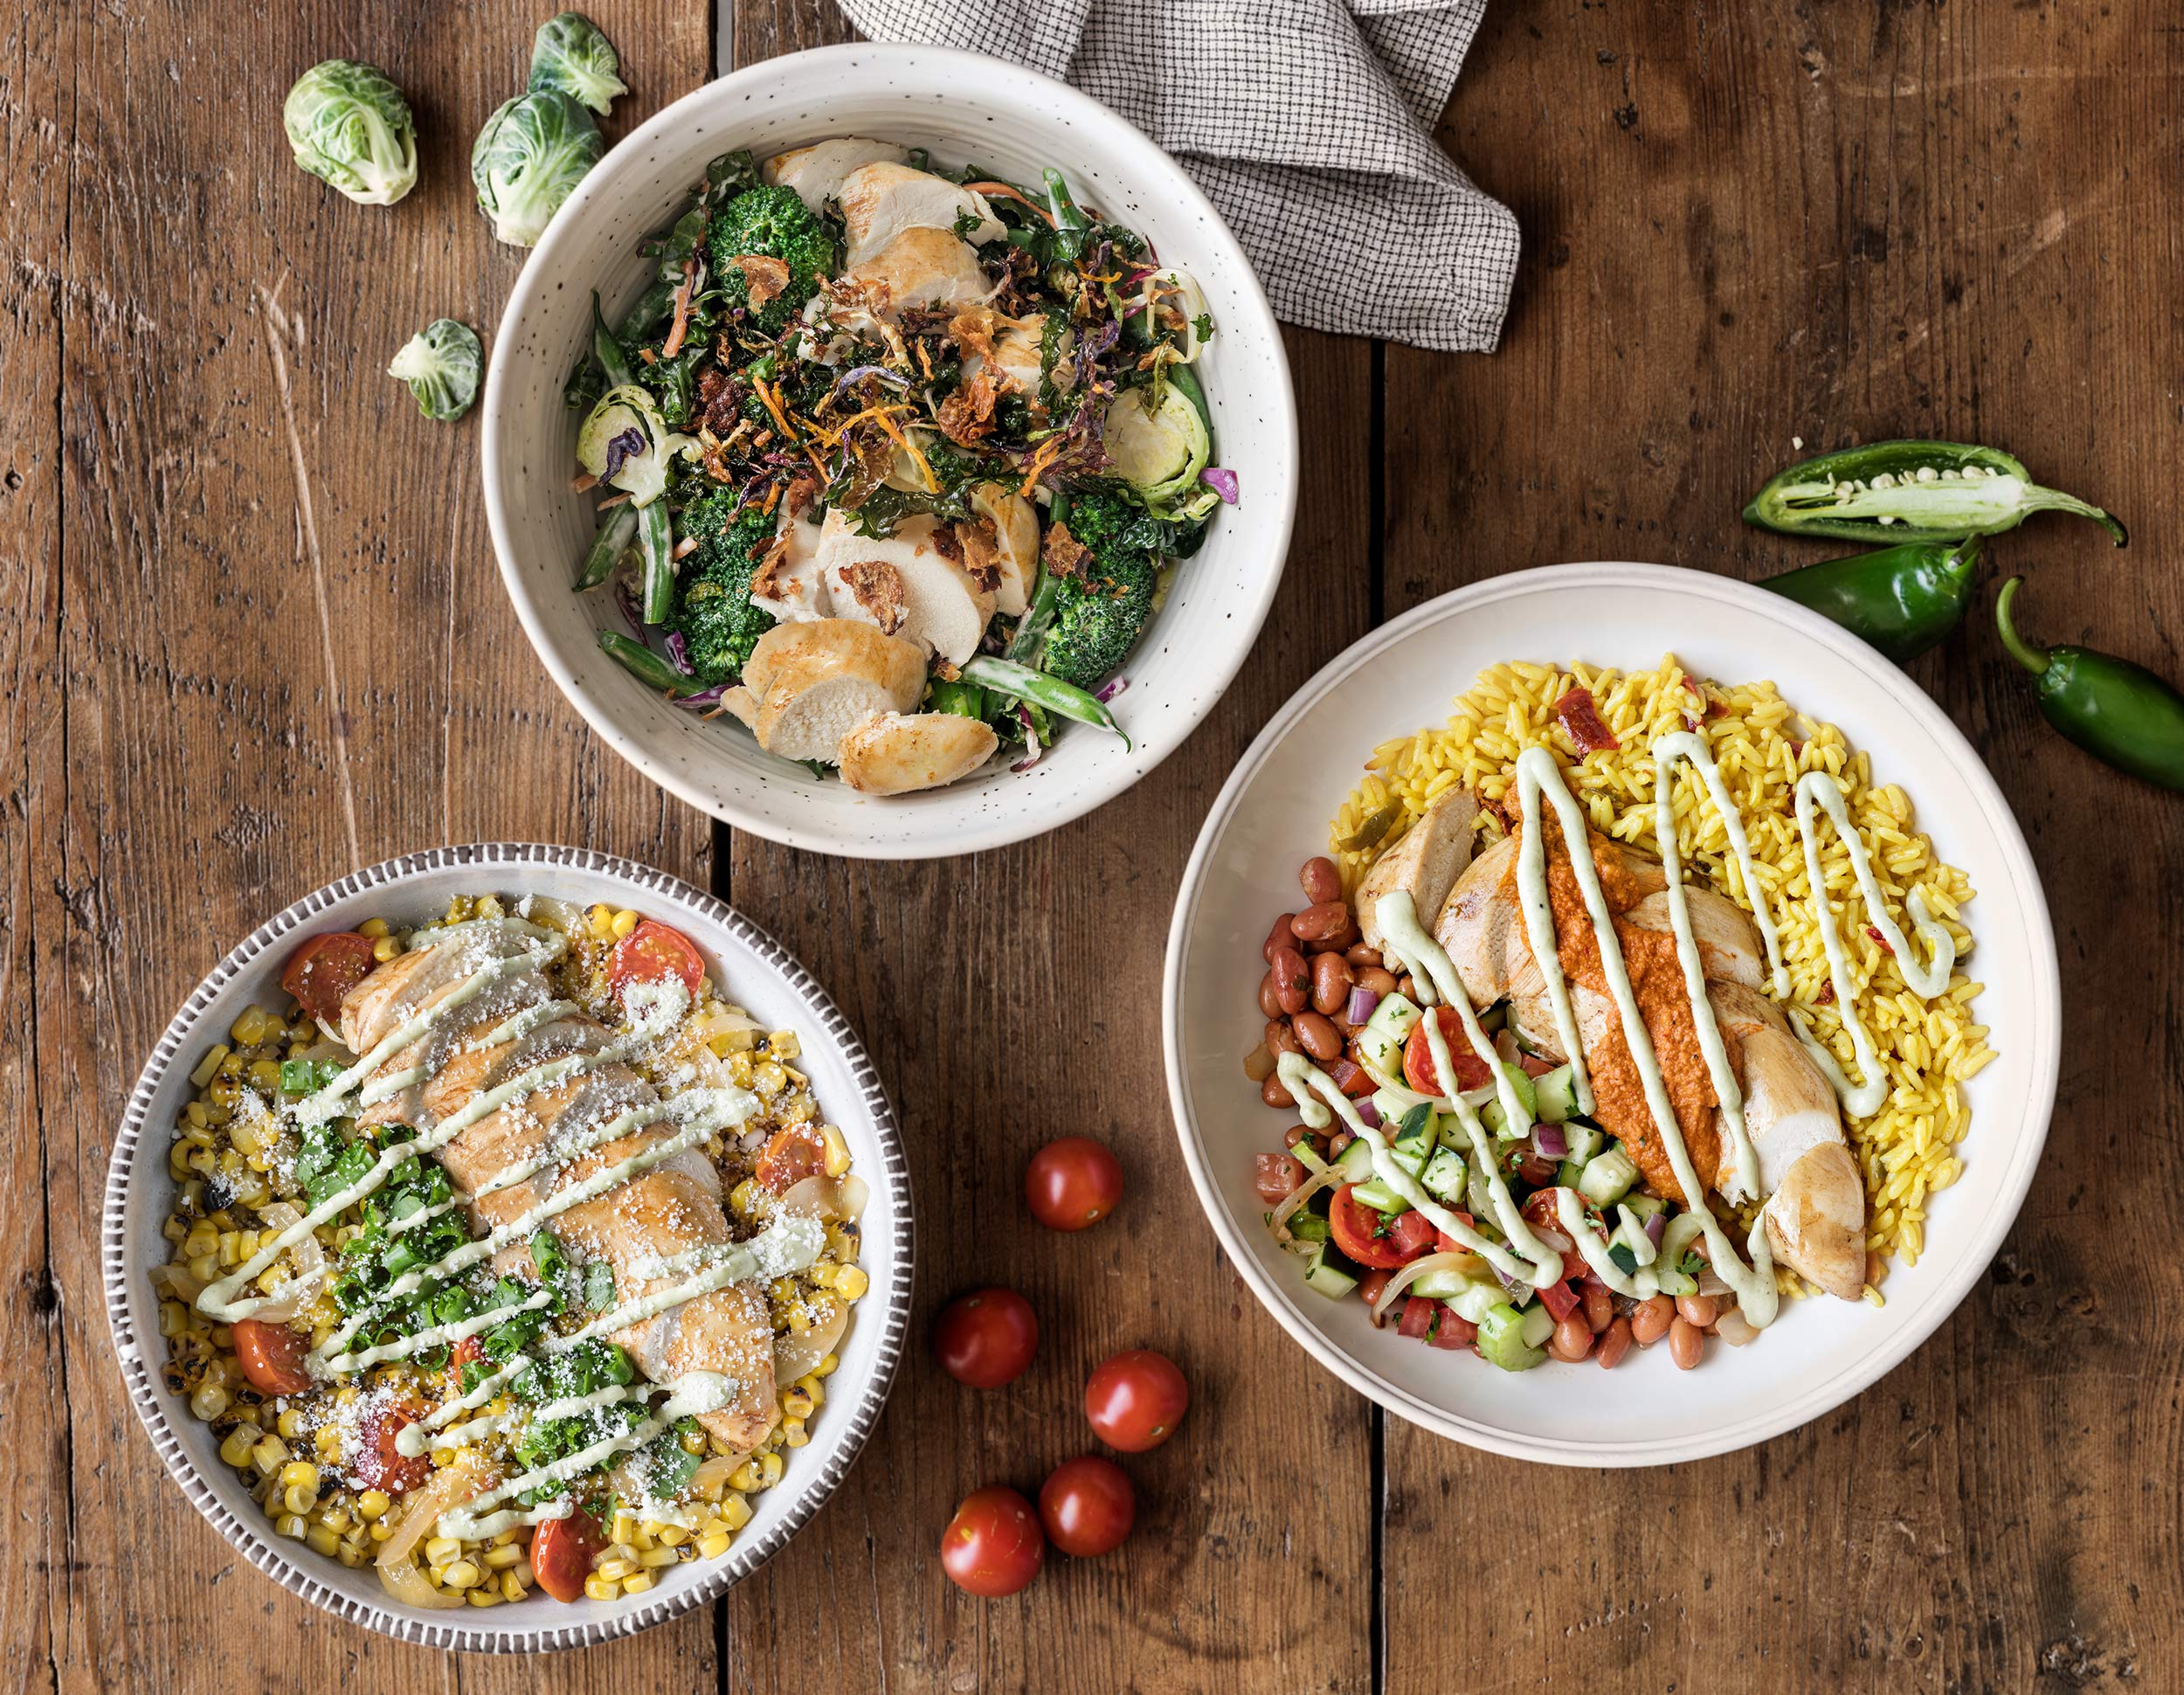 3 rotisserie chicken bowls. Corn, beans, rice, broccoli, brussels sprouts